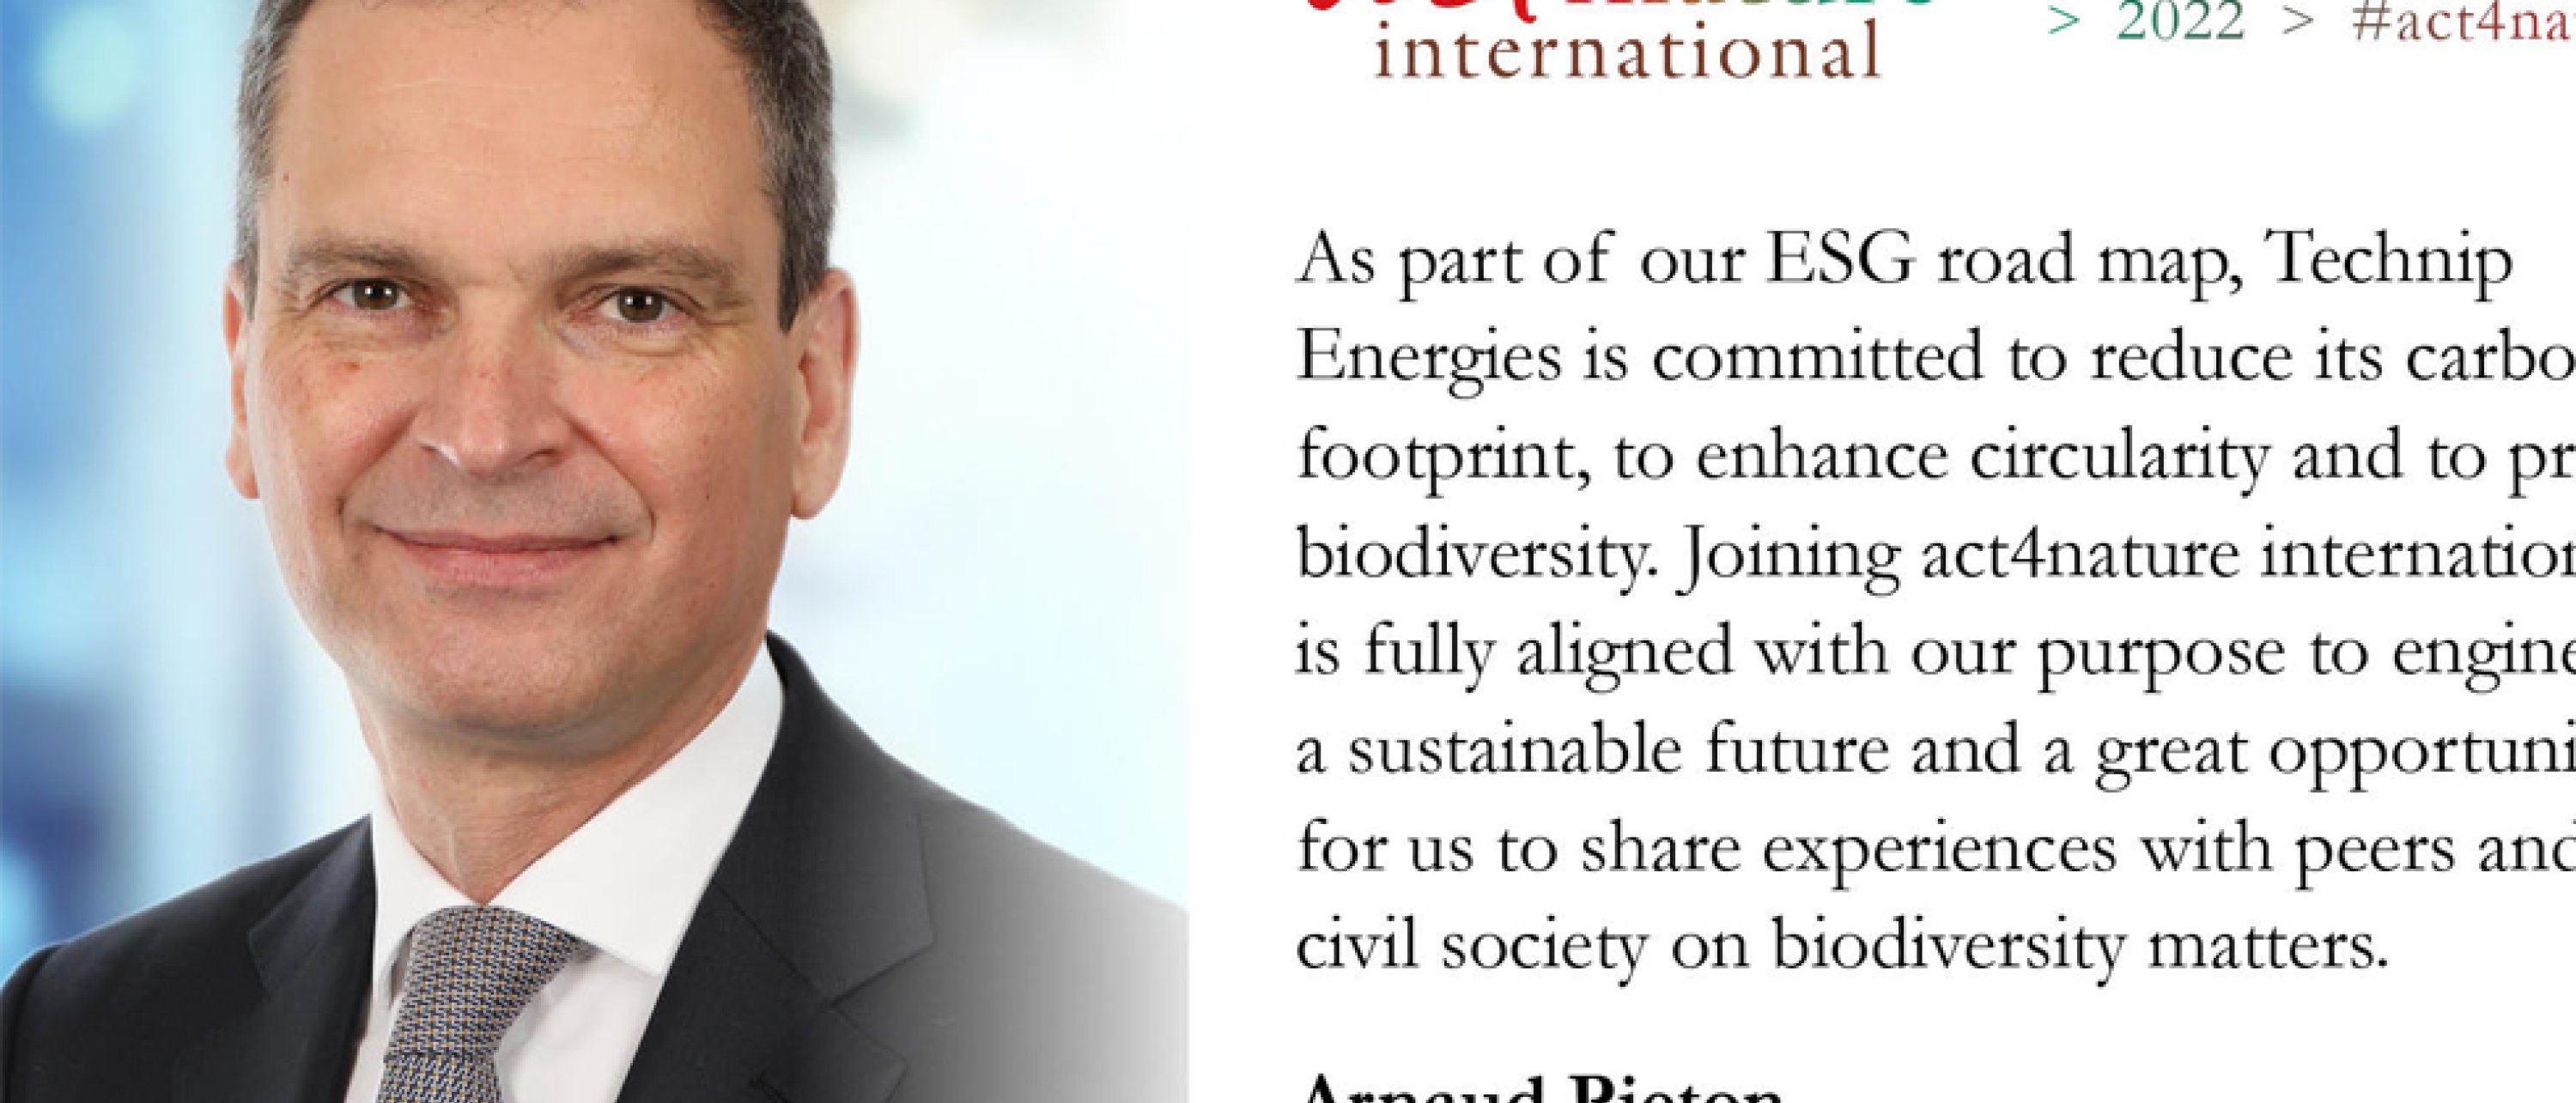 Technip Energies Joins Act4nature International to Reinforce its Commitment Towards Biodiversity